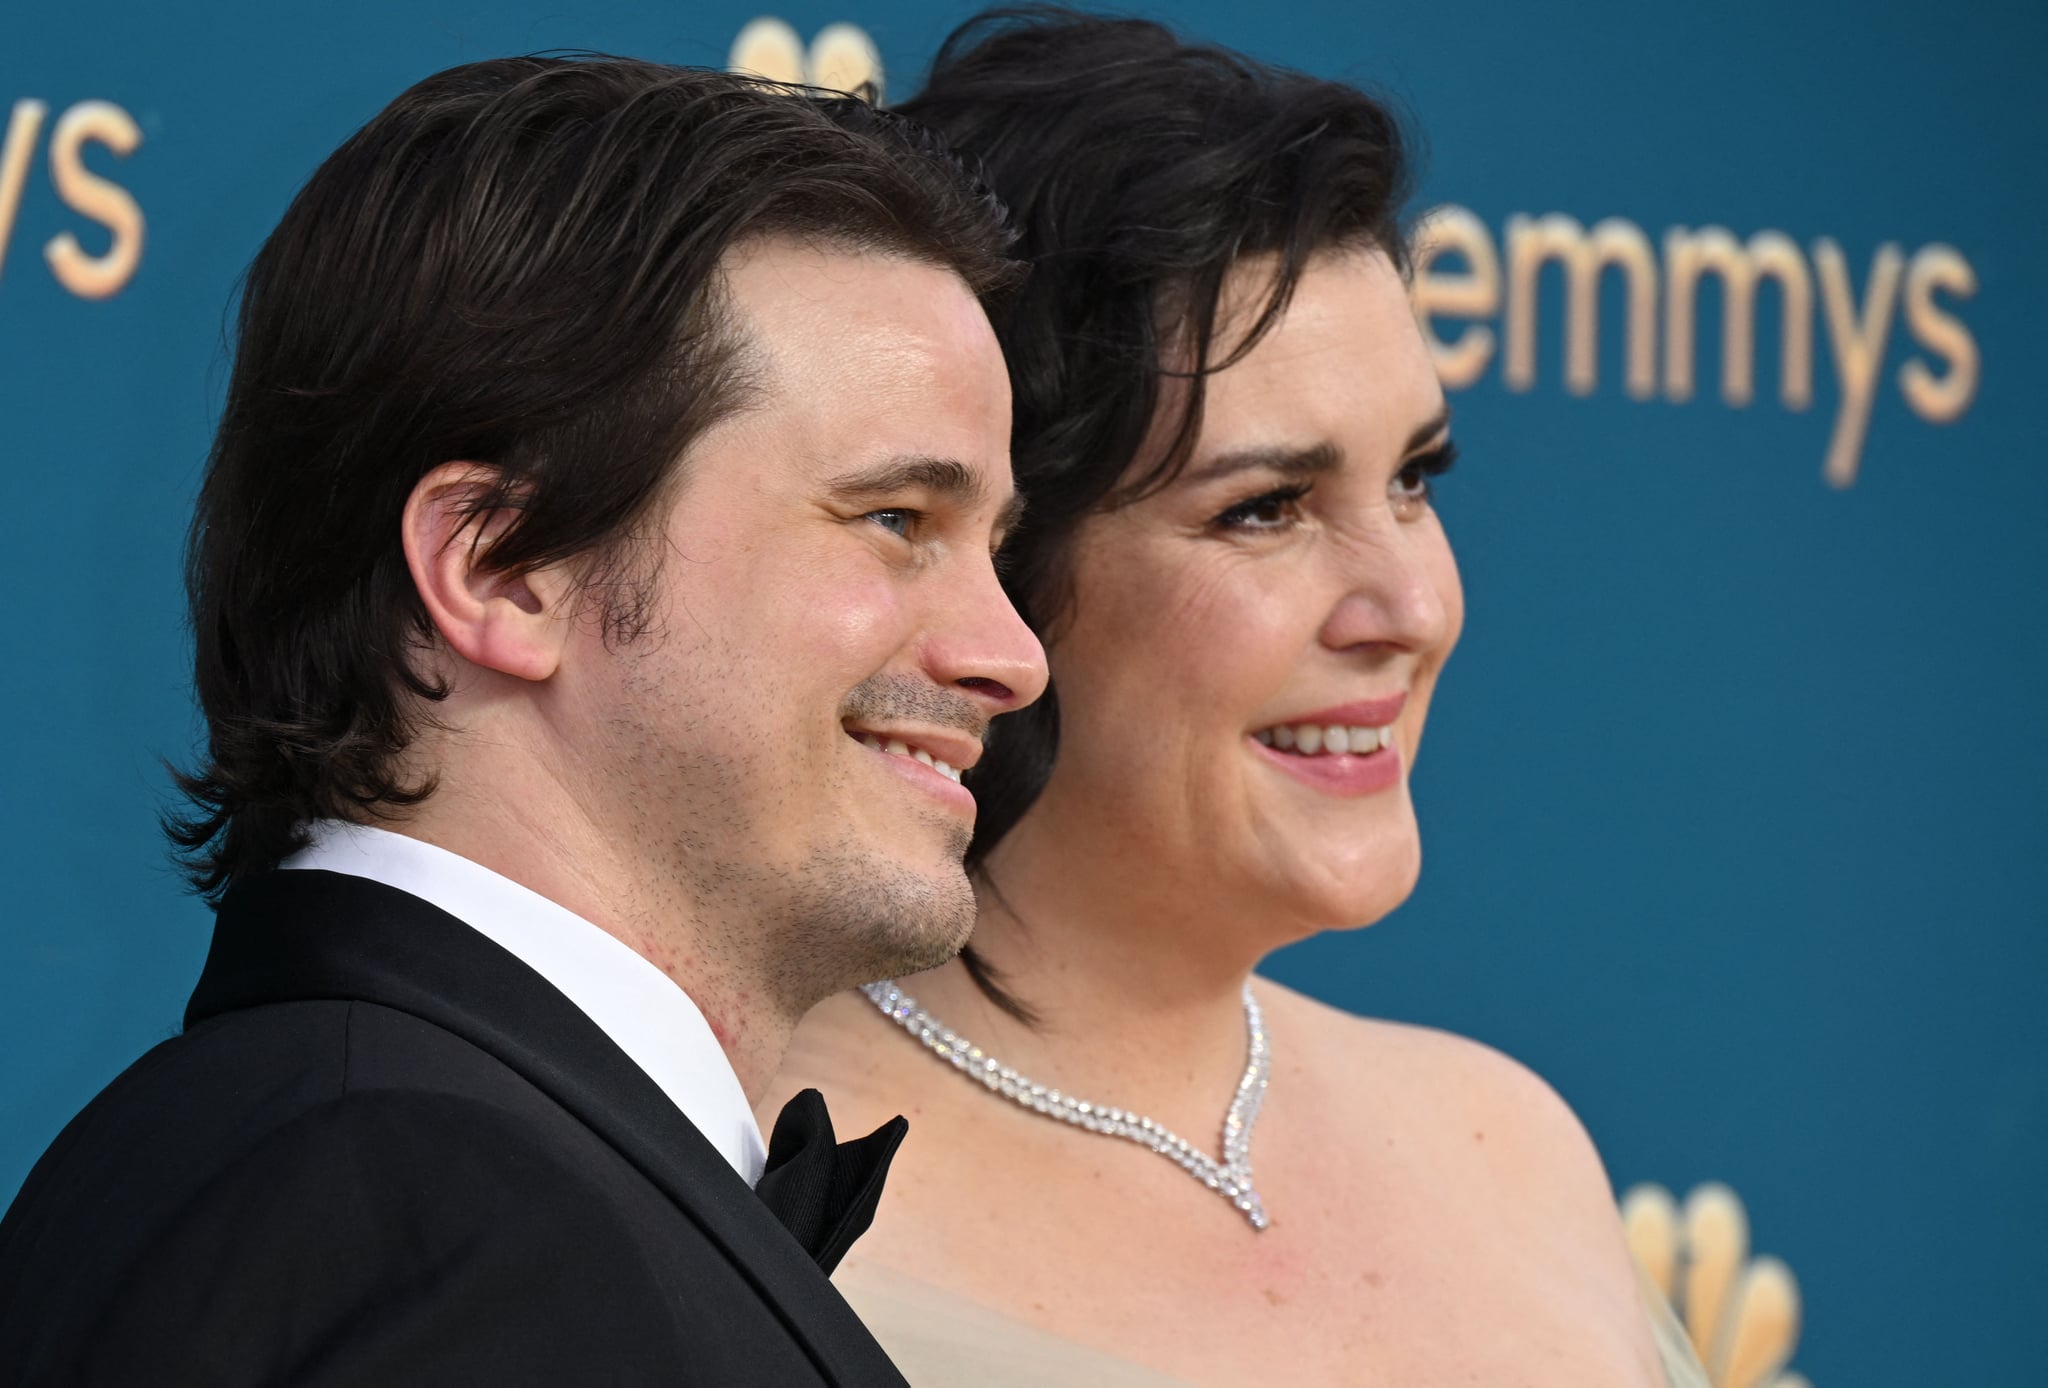 Jason Ritter(L) and Melanie Lynskey arrive for the 74th Emmy Awards at the Microsoft Theater in Los Angeles, California, on September 12, 2022. (Photo by Robyn BECK / AFP) (Photo by ROBYN BECK/AFP via Getty Images)